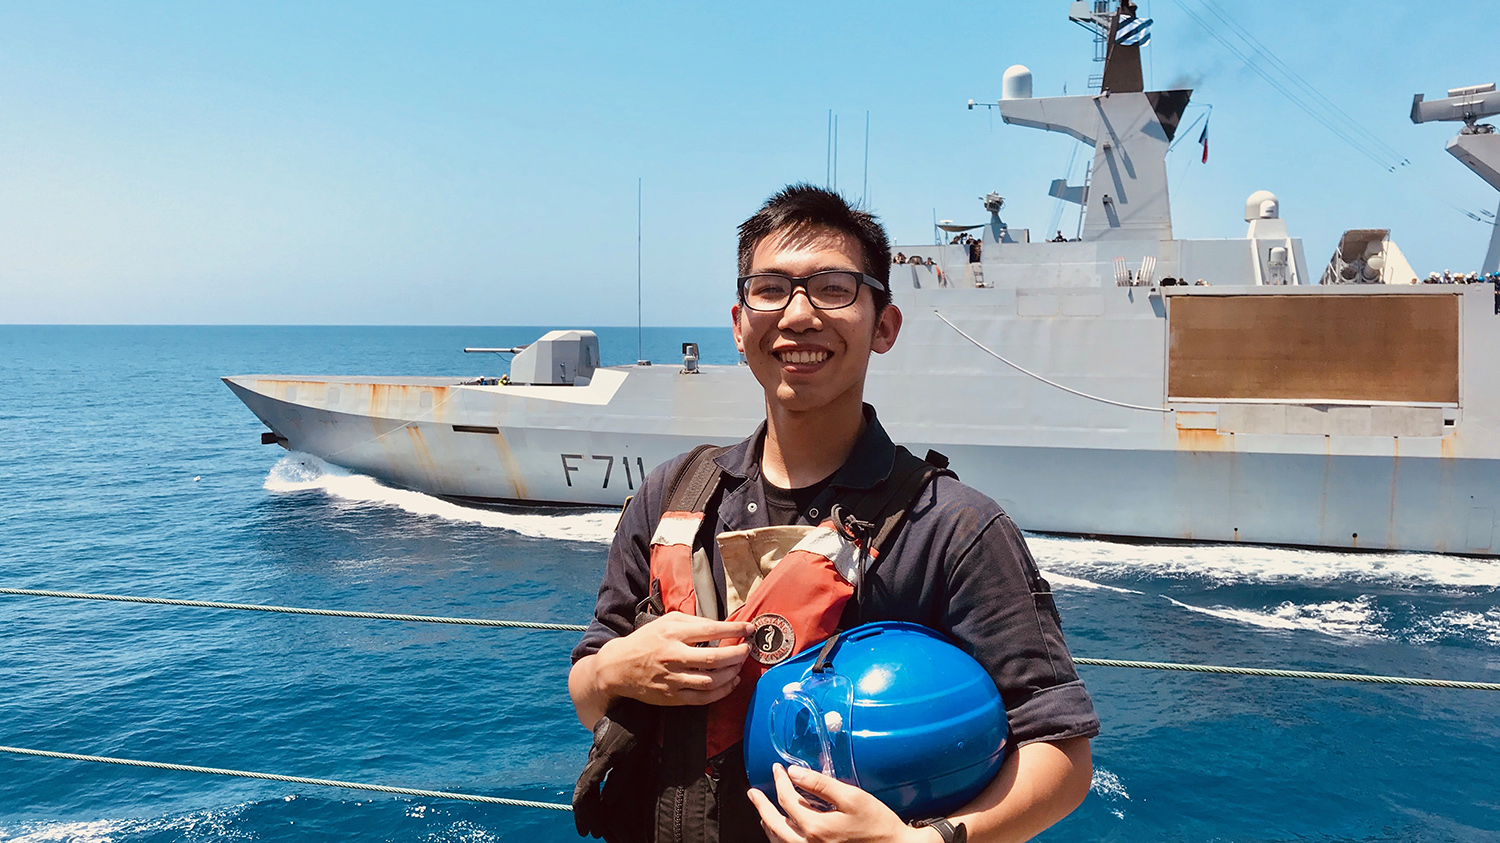 Chen aboard the USNS Big Horn on its cruise to the Persian Gulf in the summer of 2019